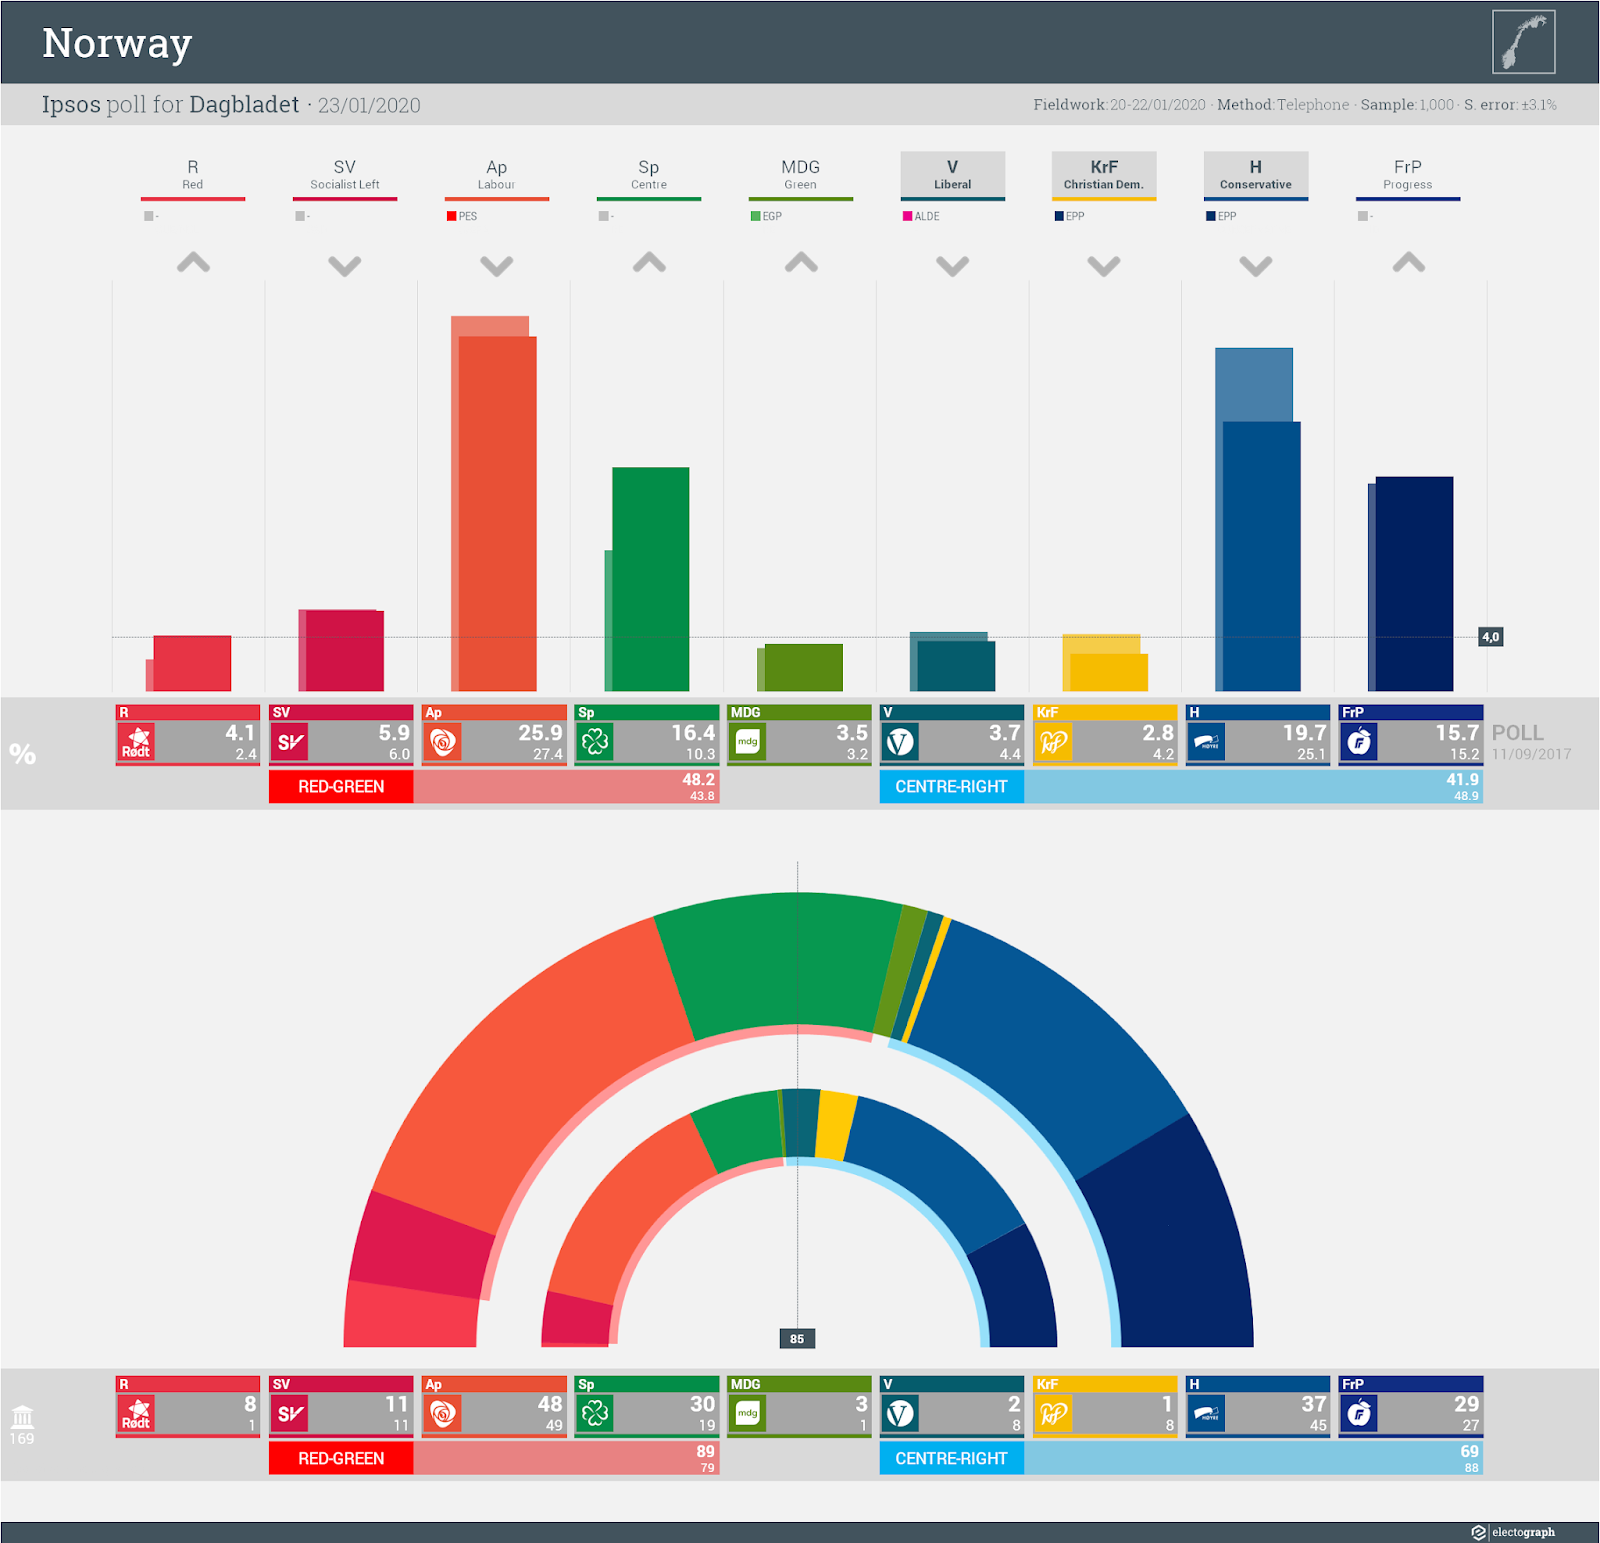 NORWAY: Ipsos poll chart for Dagbladet, 23 January 2020